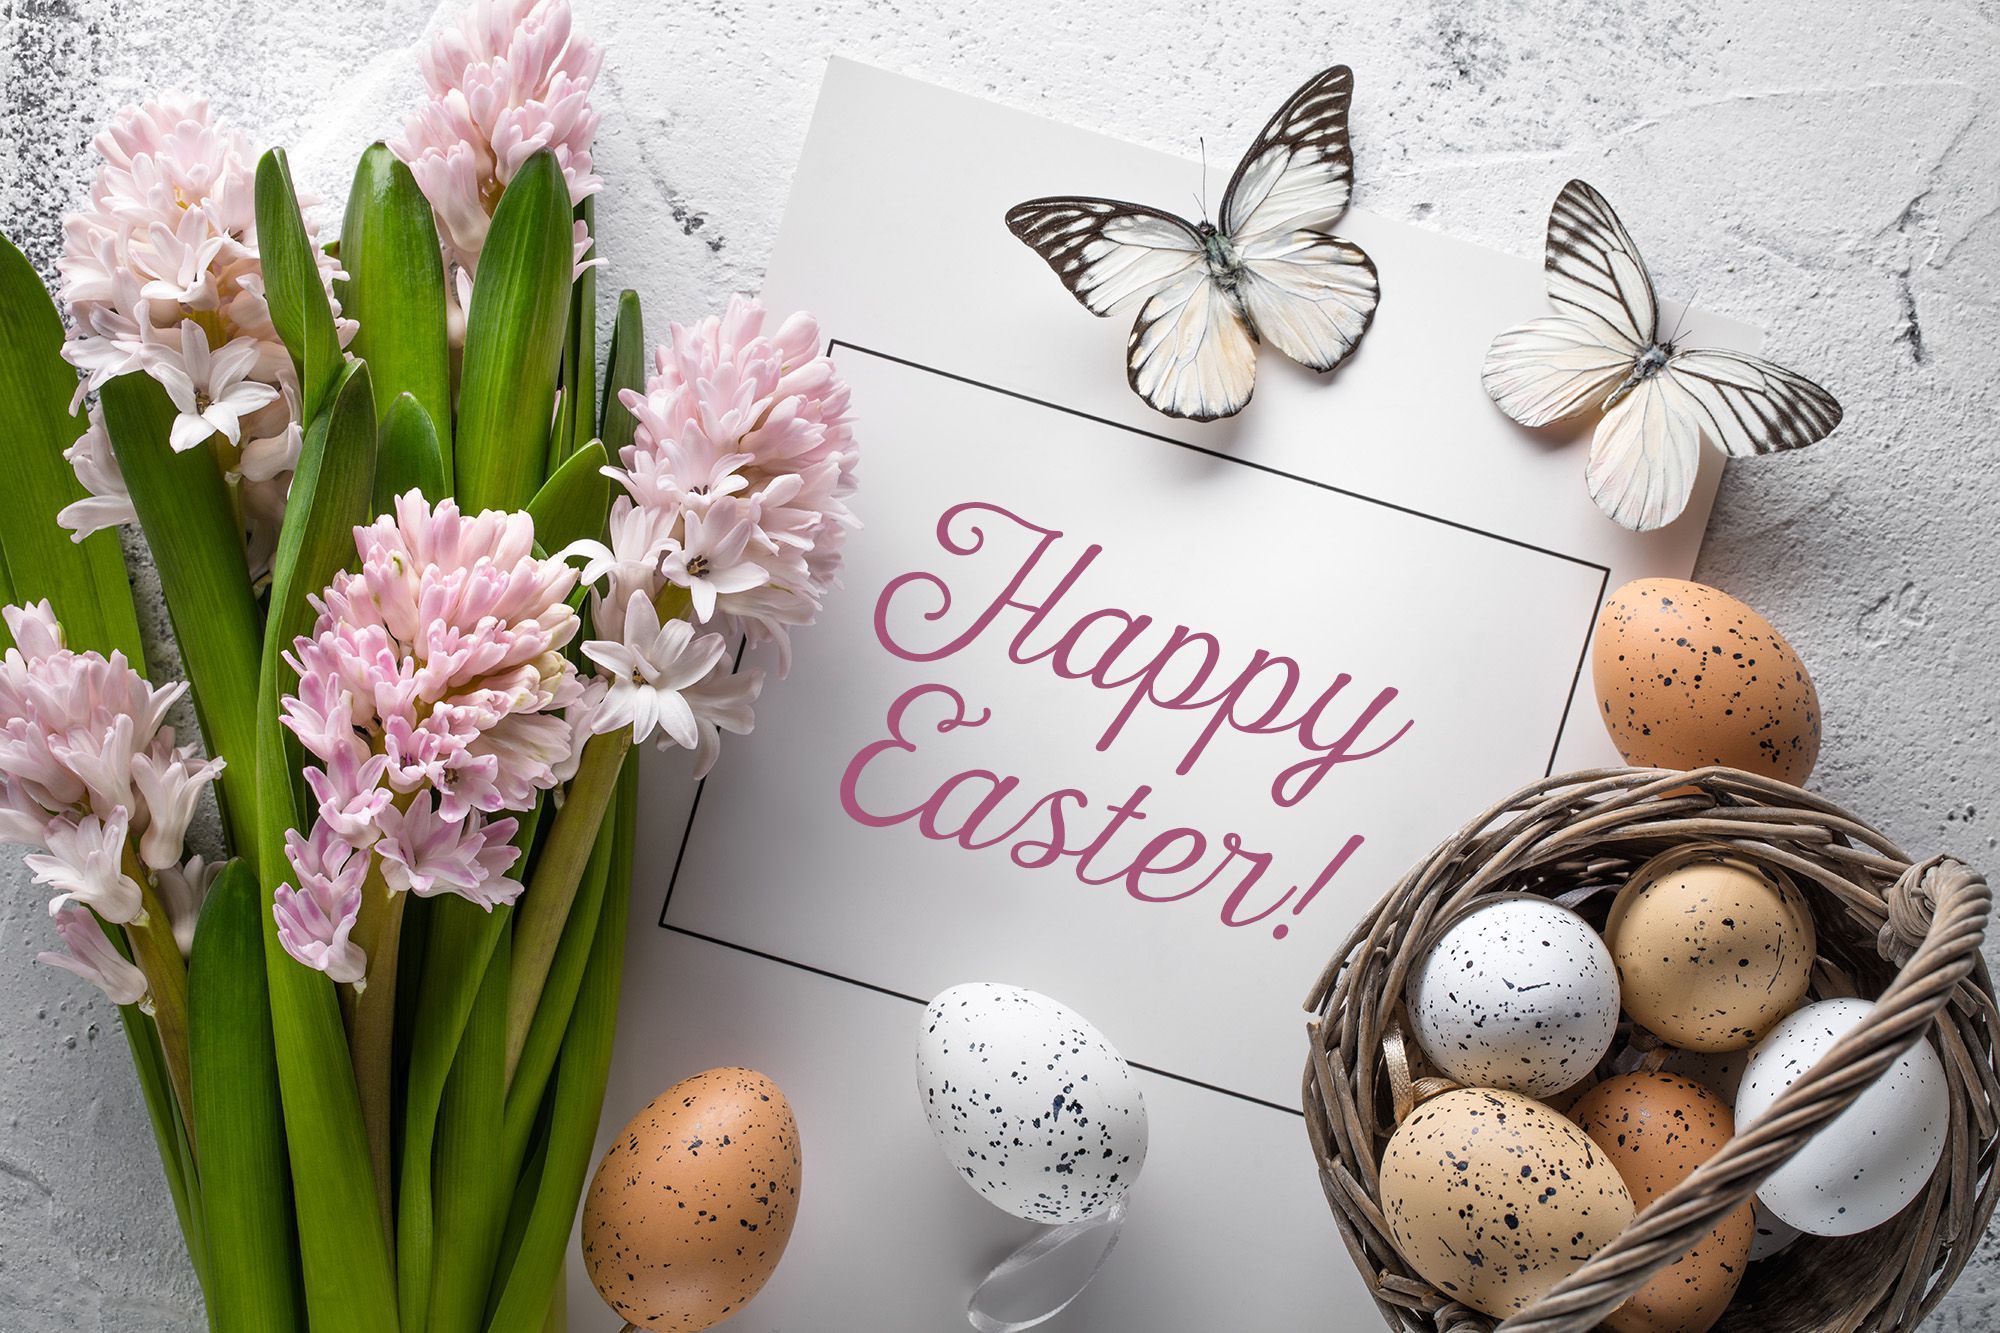 ᐅ Happy Easter Image 2019: Easter Picture, Photo